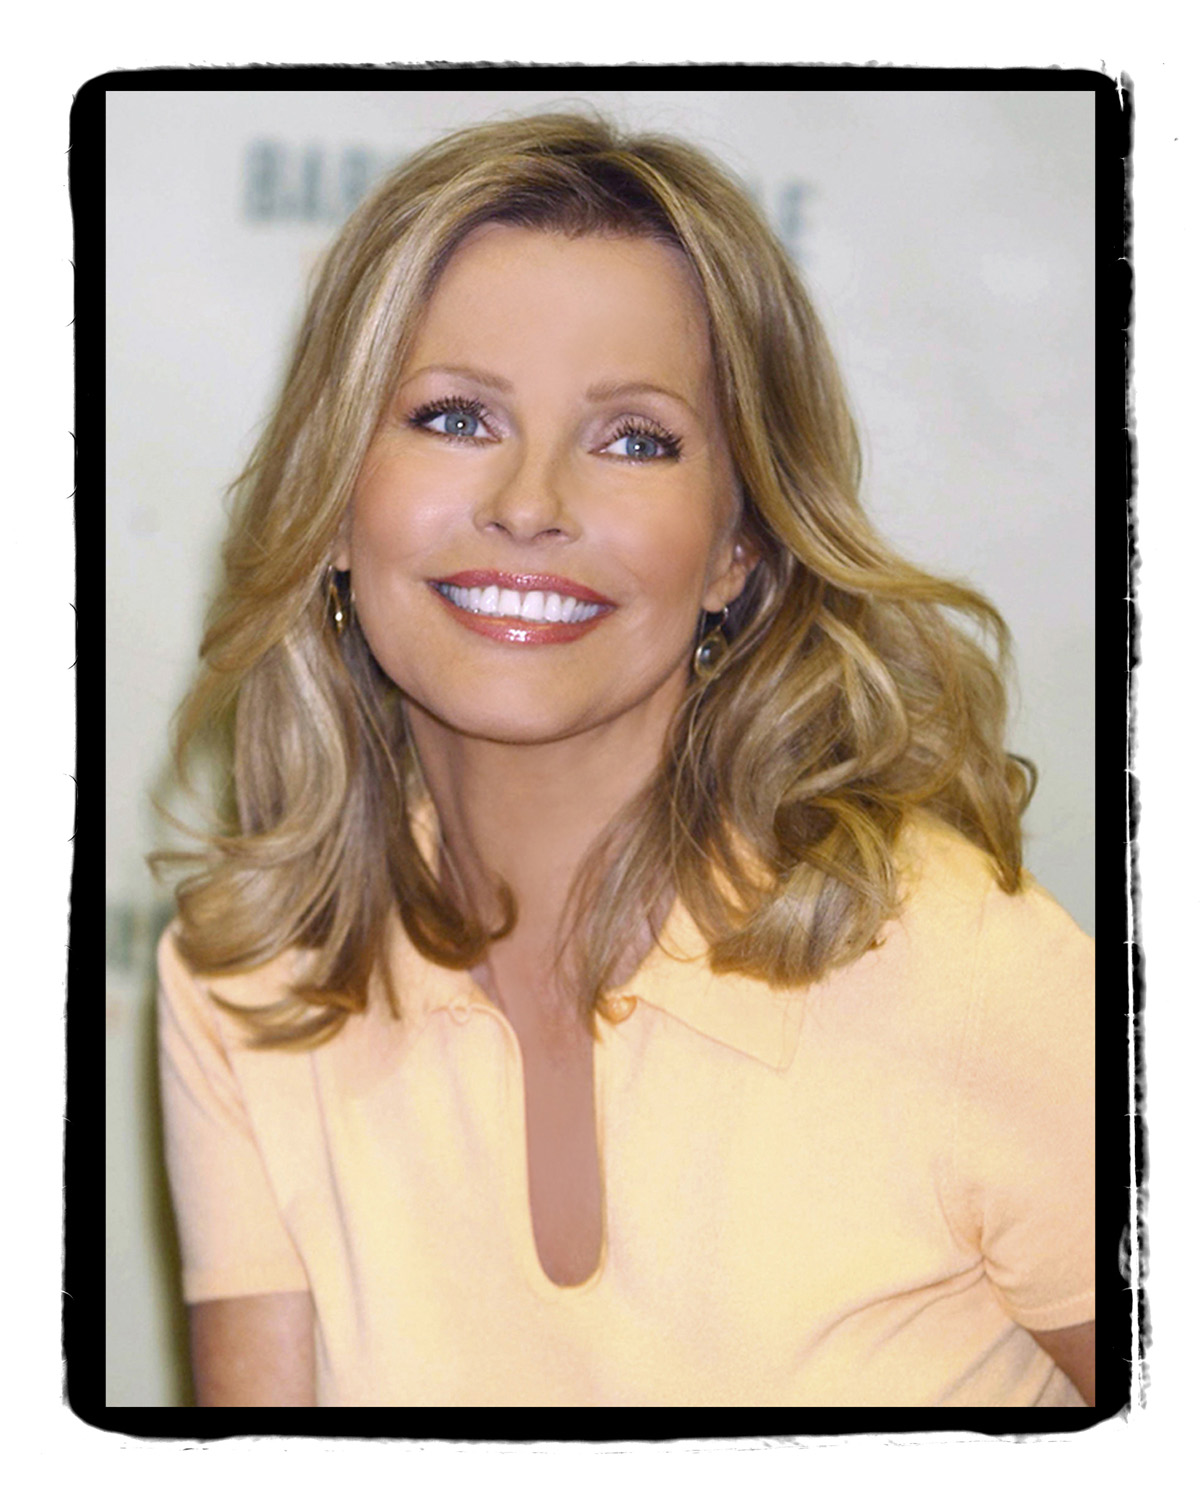 The Cheryl Ladd Diet Will Make You Want to Try It